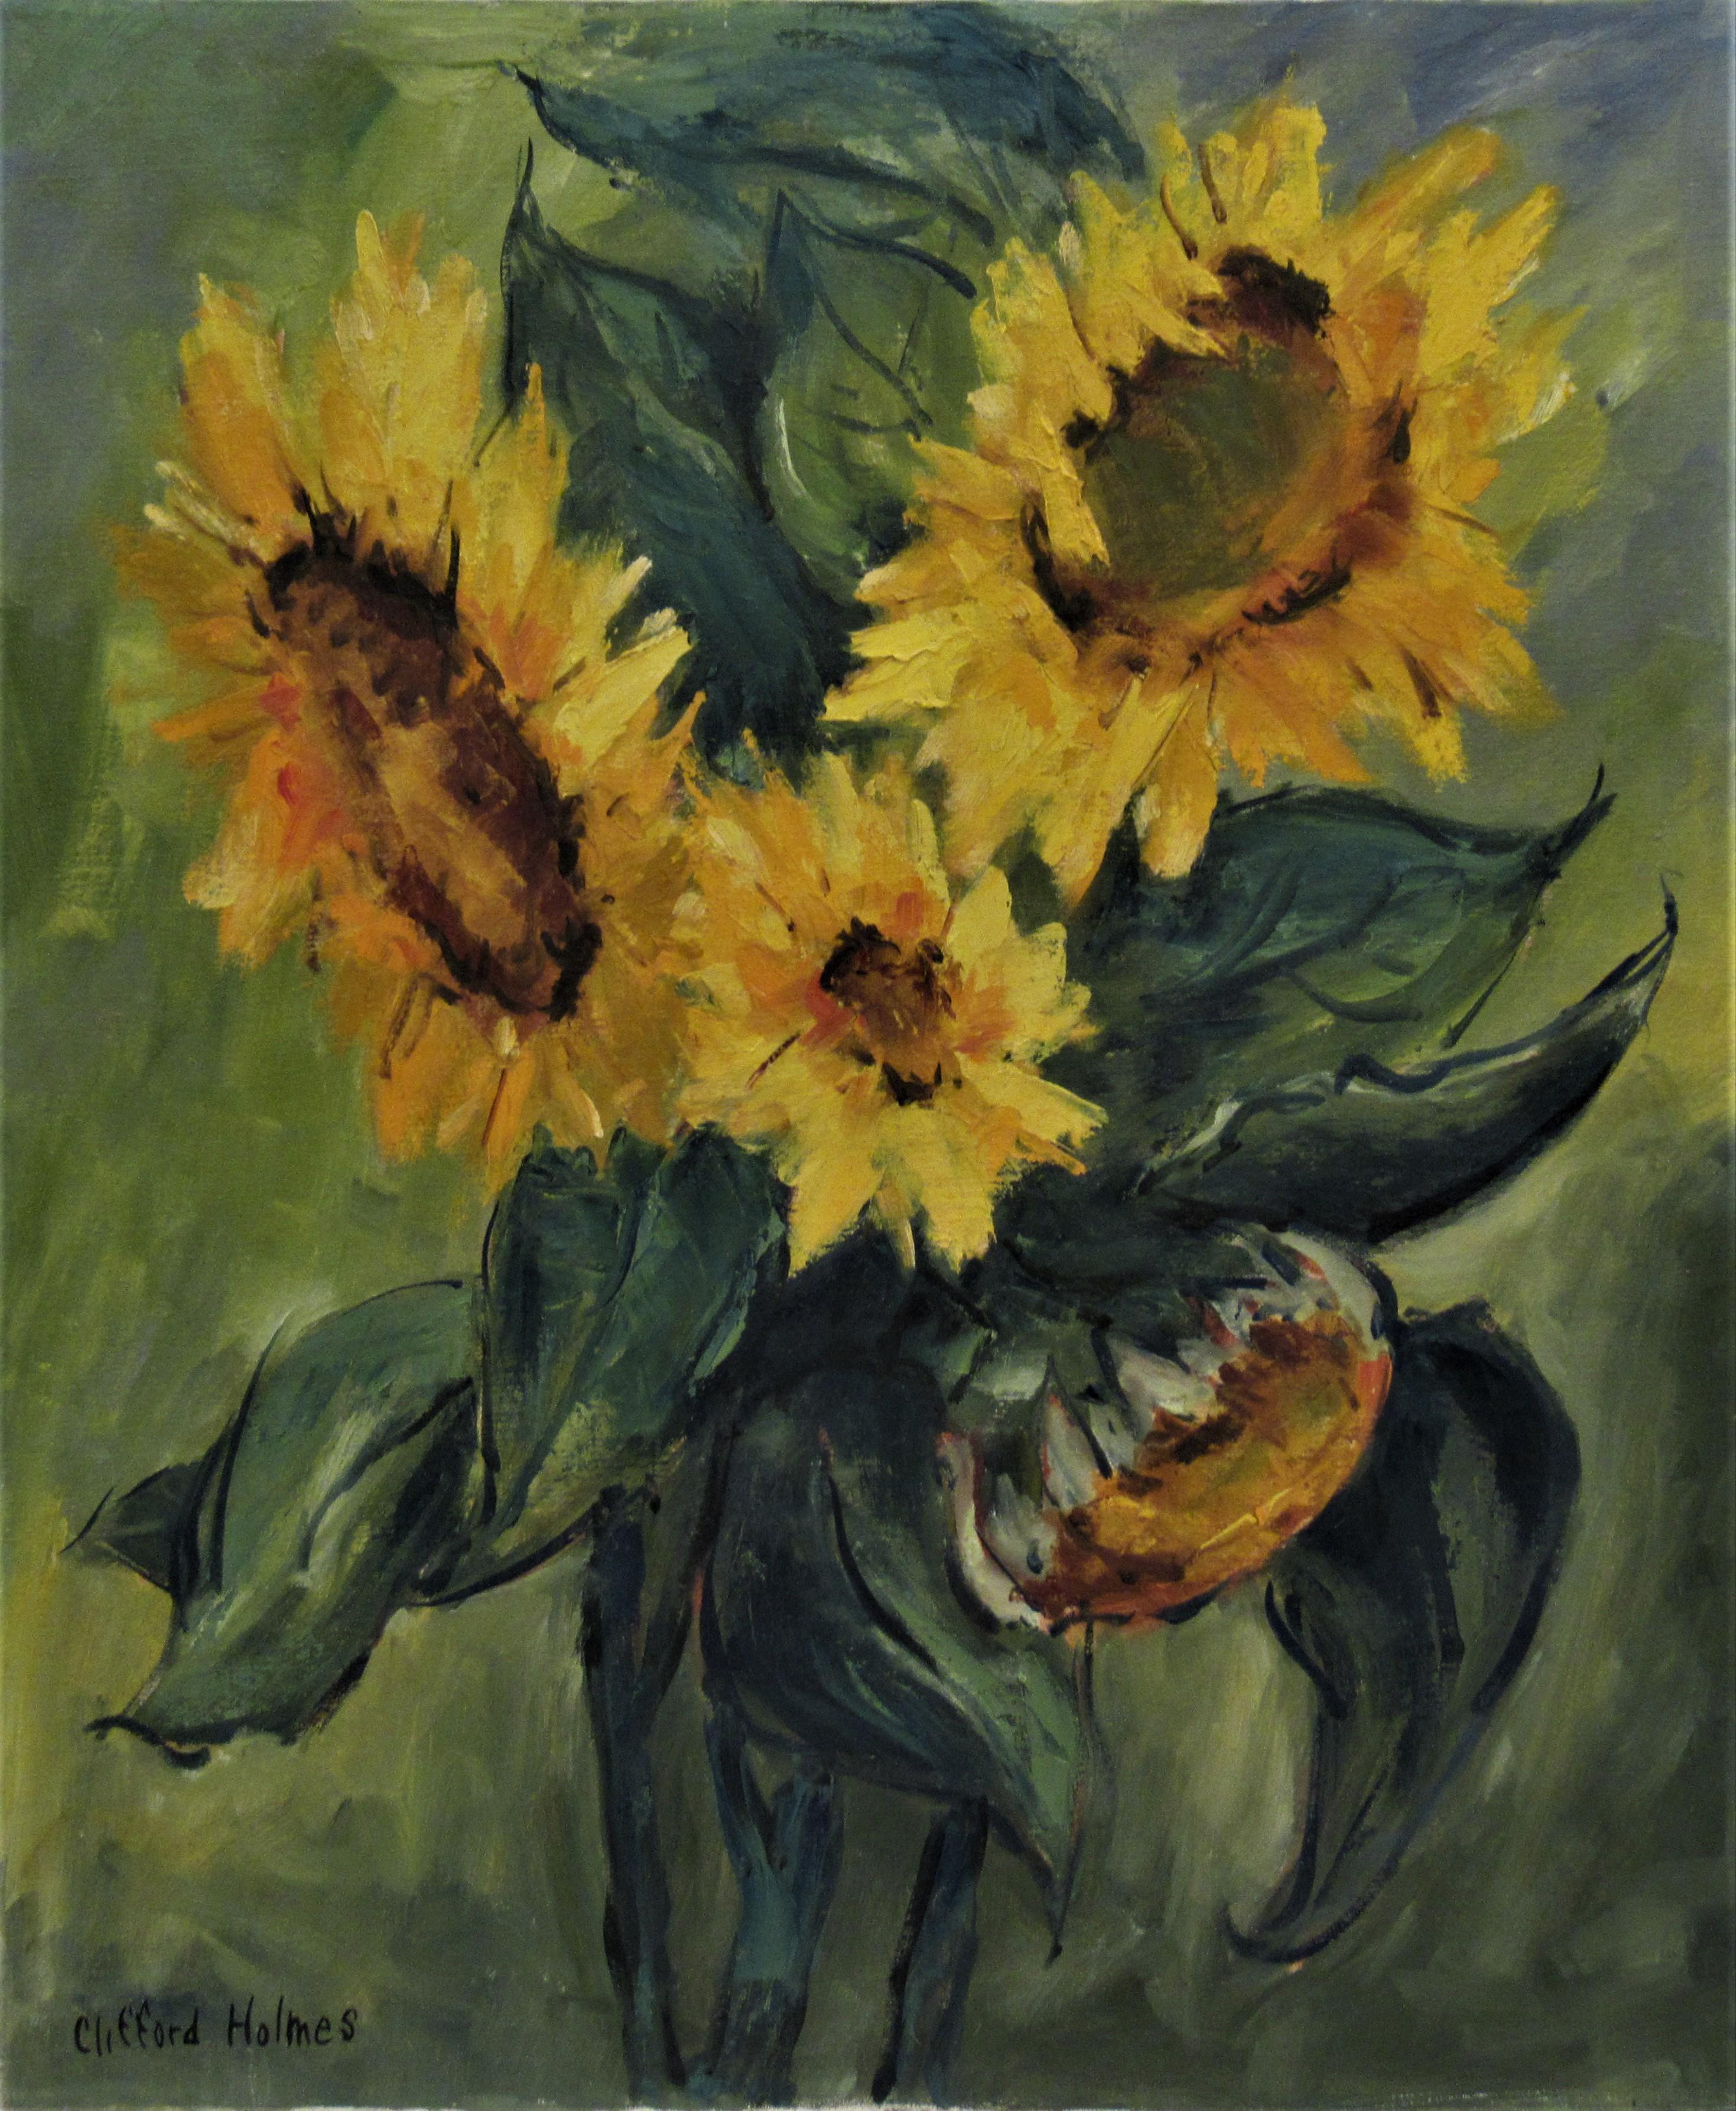 Clifford Holmes Figurative Painting - Sunflowers